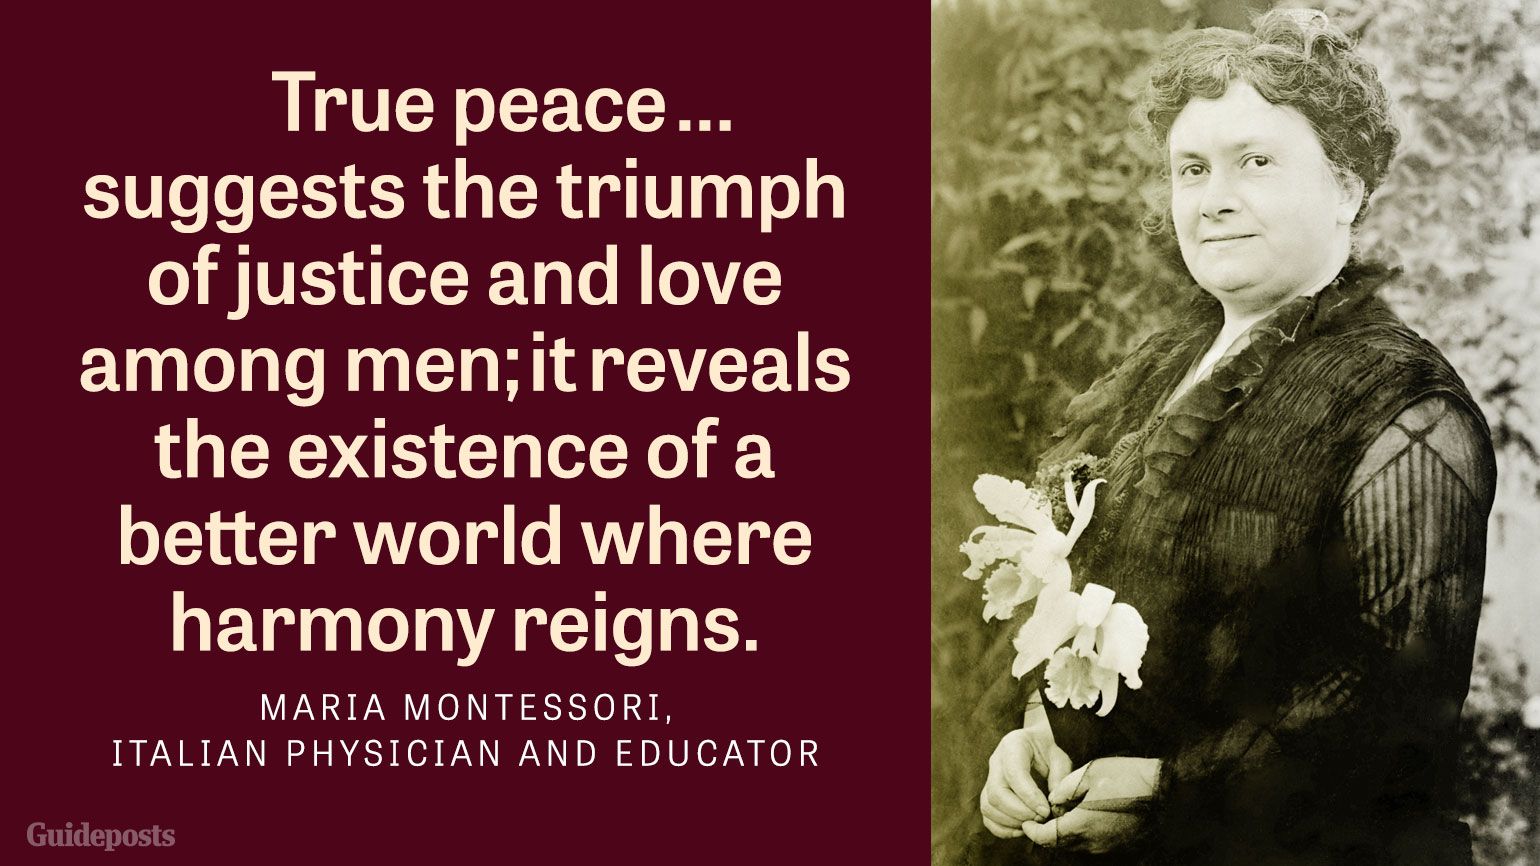 True peace...suggests the triumph of justice and love among men; it reveals the existence of a better world where harmony reigns.